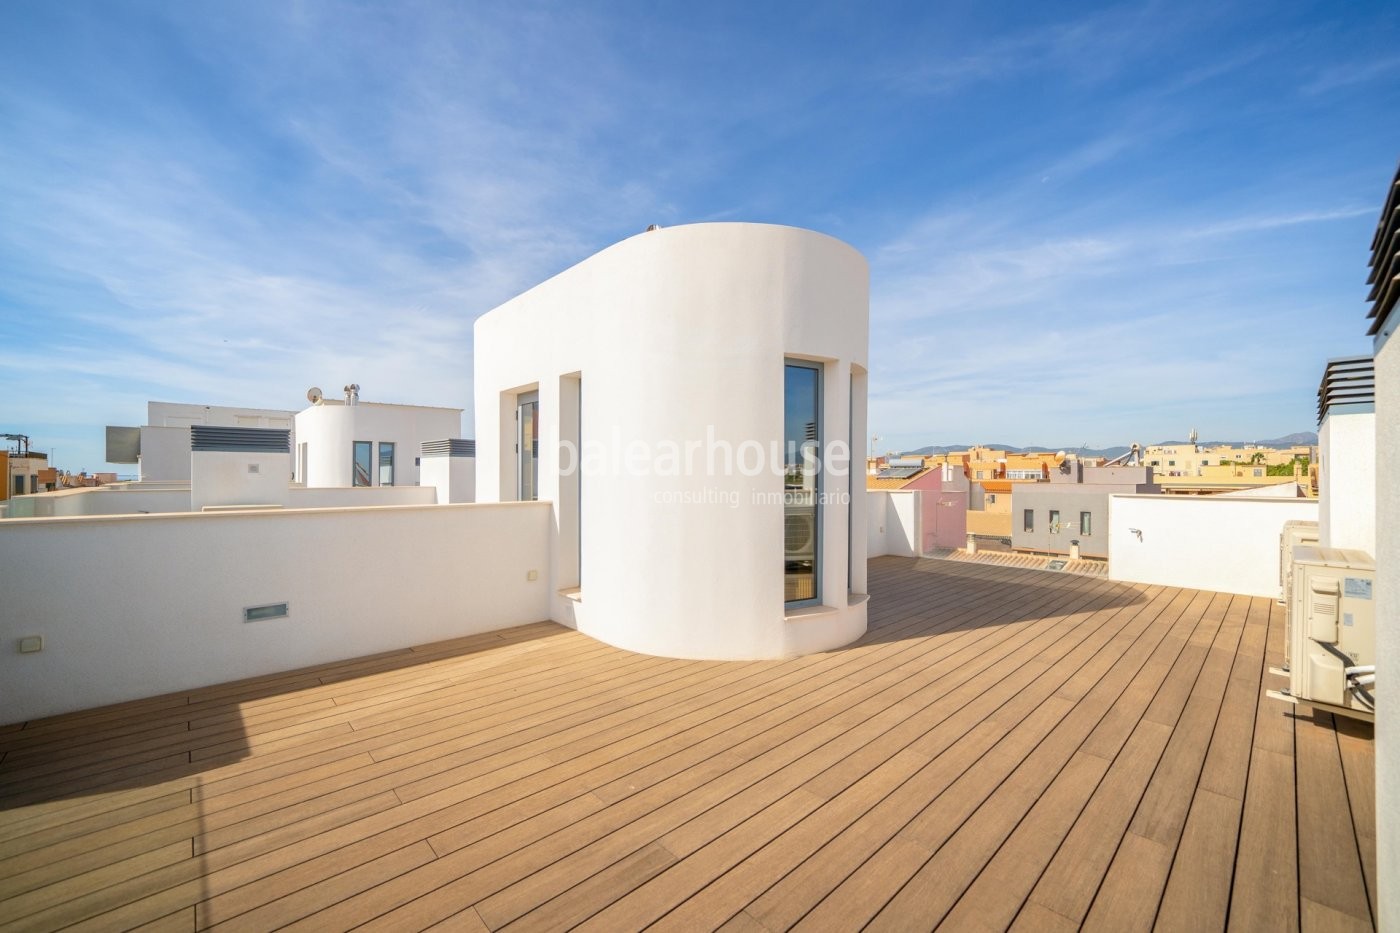 Modern new development of 4 three story houses with roof top terraces.